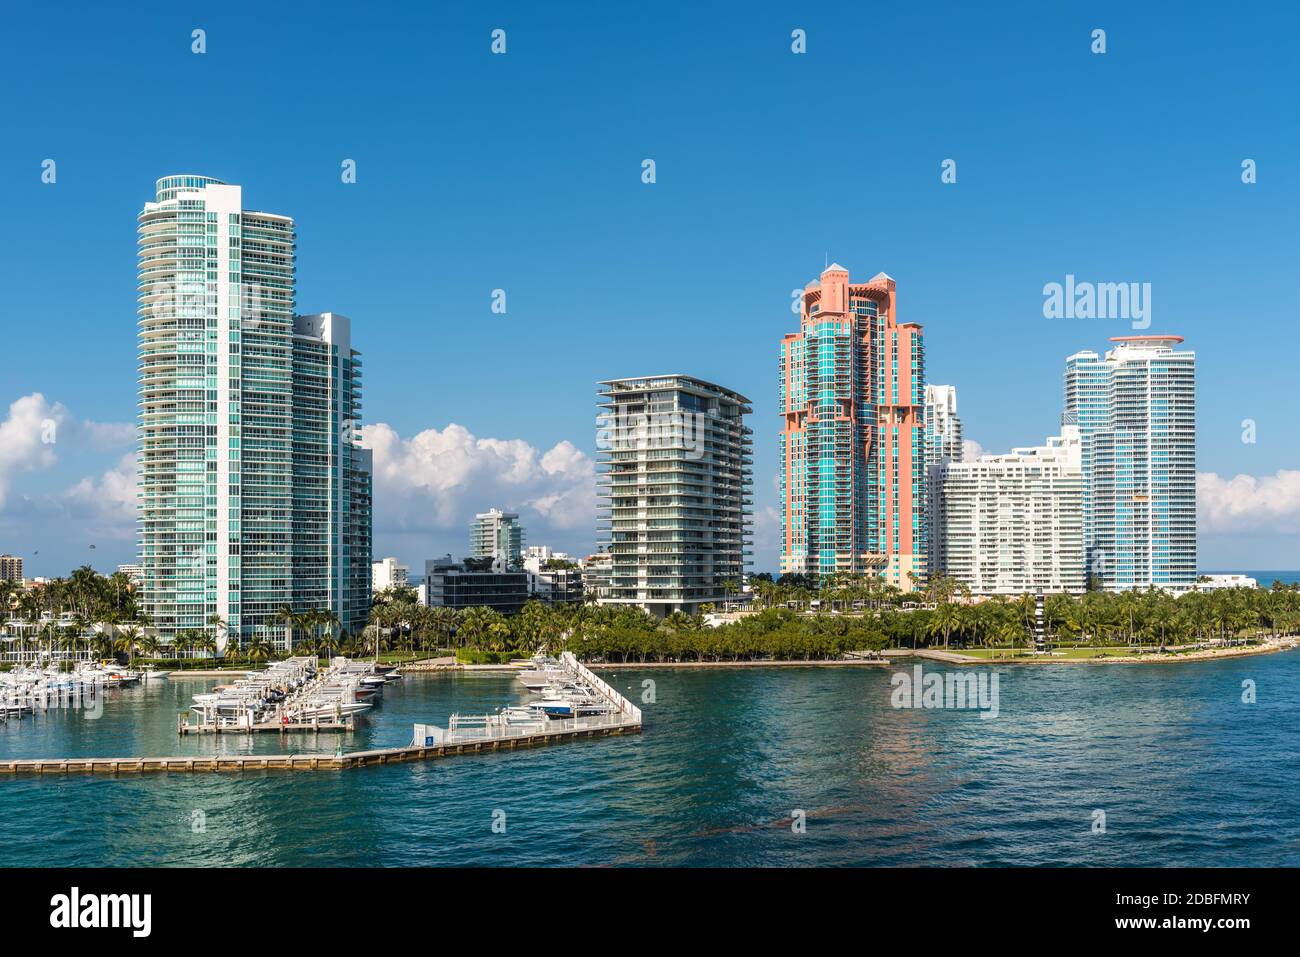 Miami, FL, United States - April 28, 2019: Luxury high-rise condominiums overlooking boat parking on the Florida Intra-Coastal Waterway in Miami Beach Stock Photo